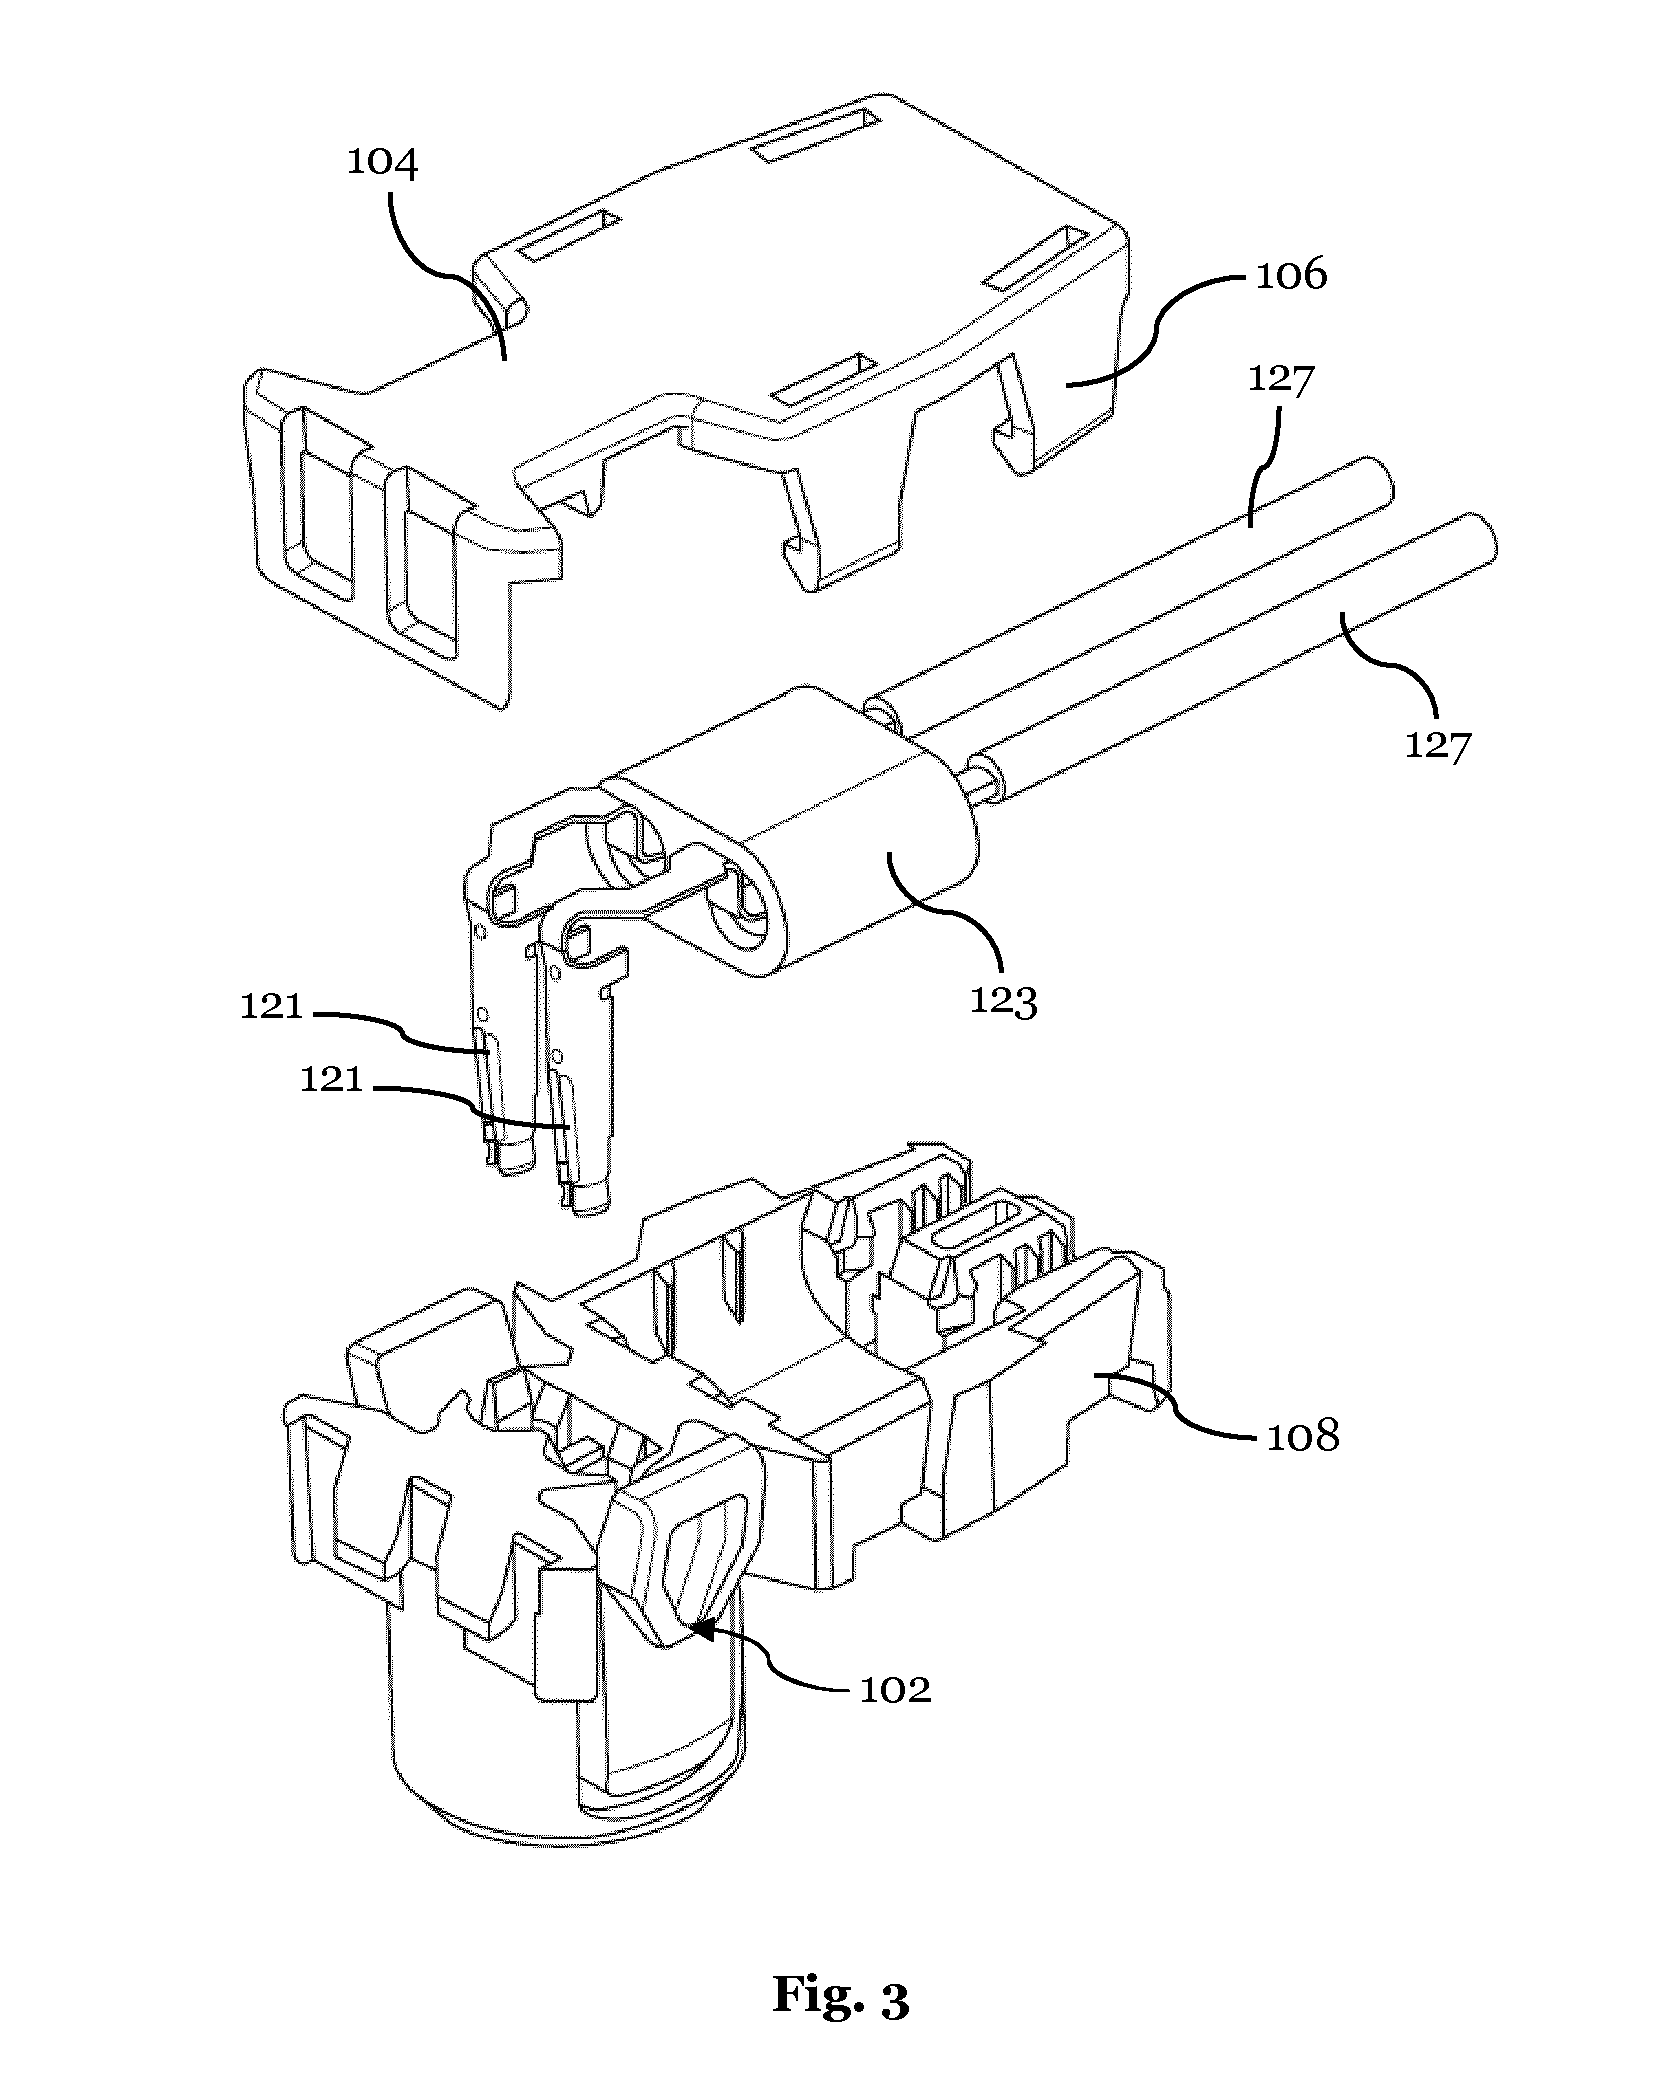 Airbag connector system